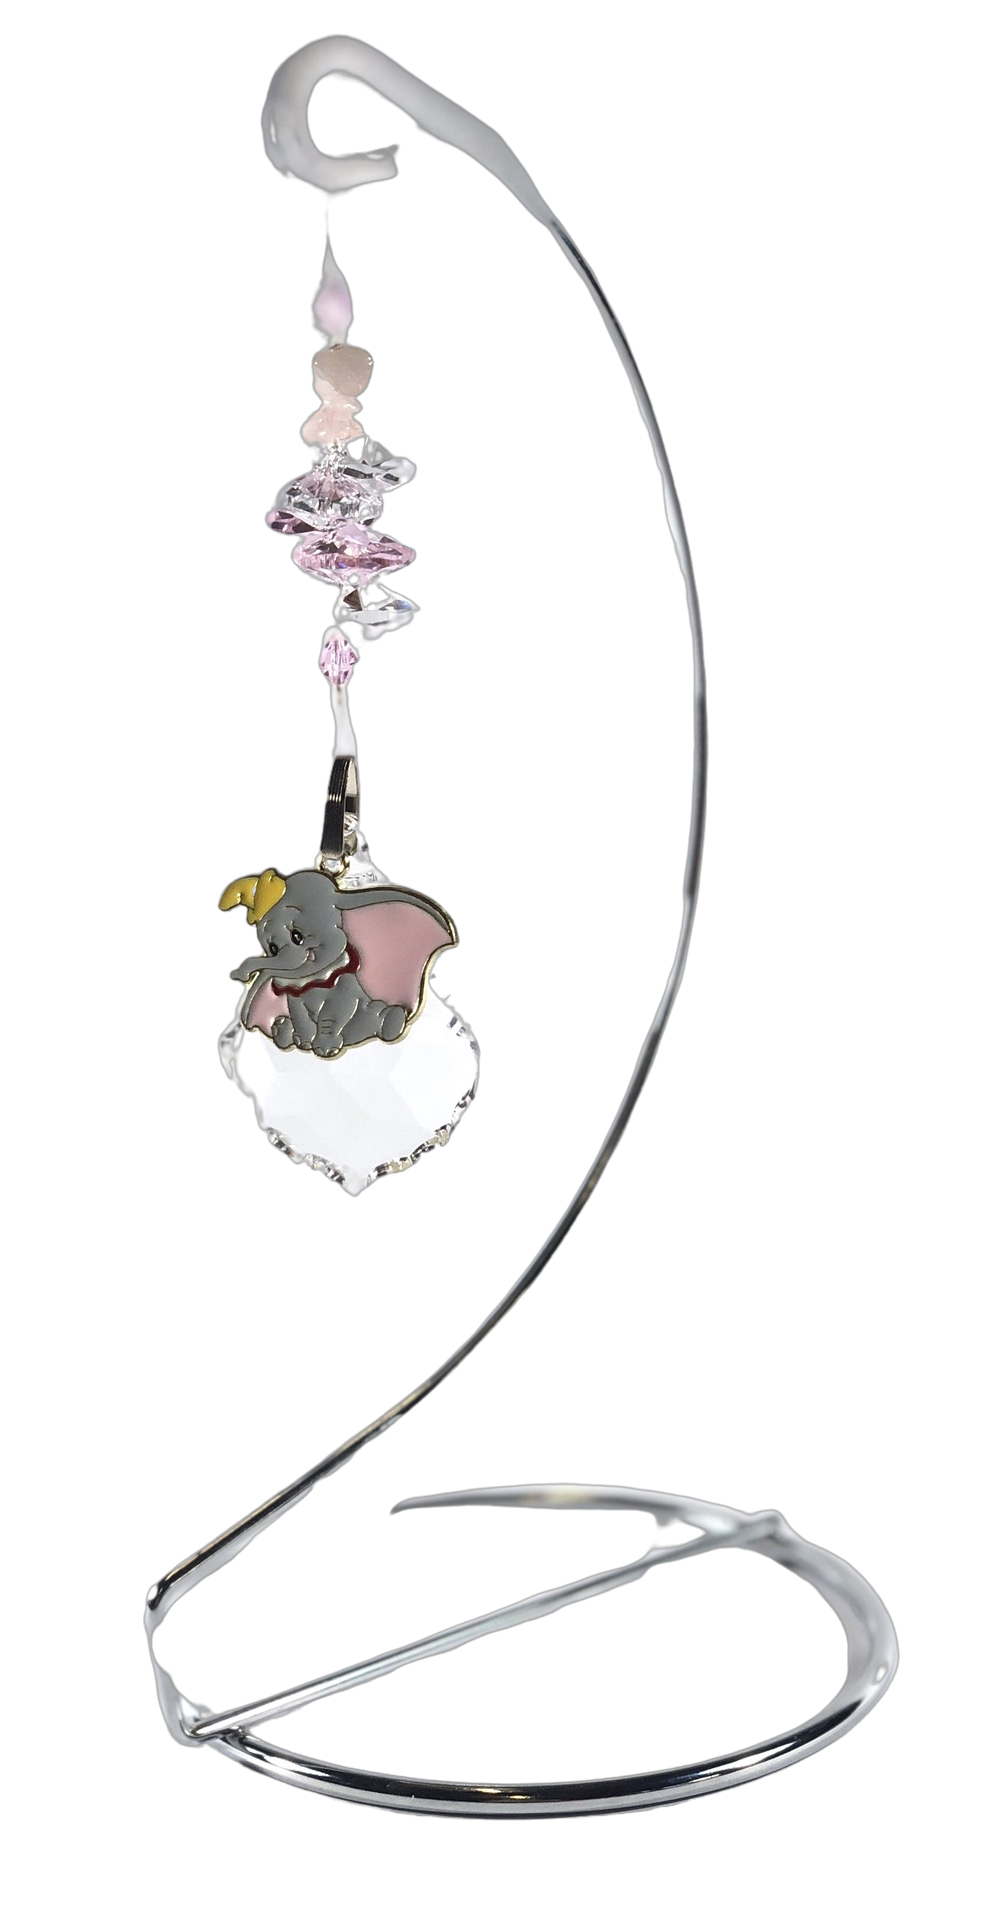 Dumbo - Disney crystal suncatcher is decorated with rose quartz gemstones and come on this amazing stand.